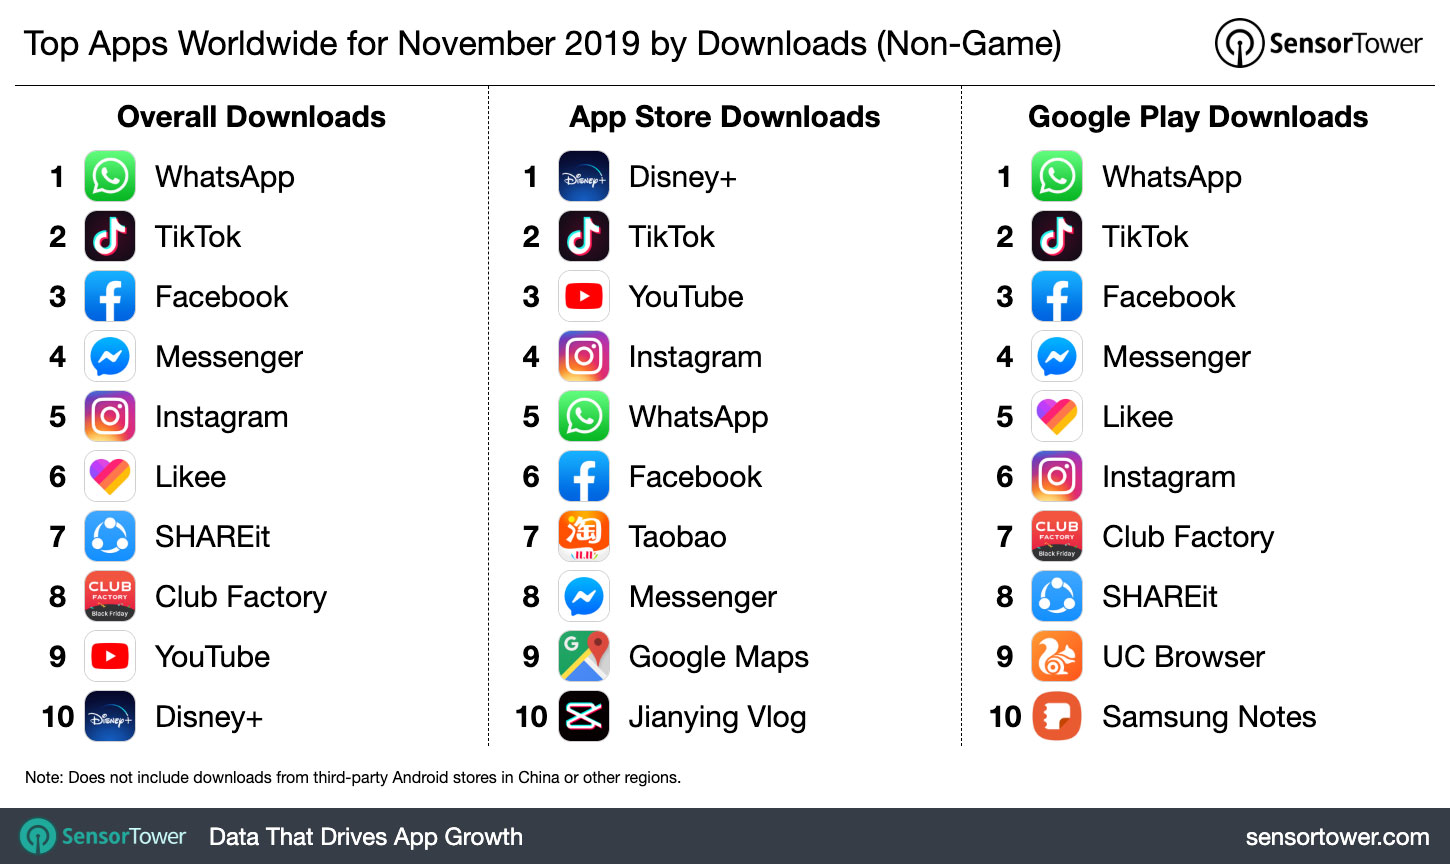 Top Apps Worldwide for November 2019 by Downloads